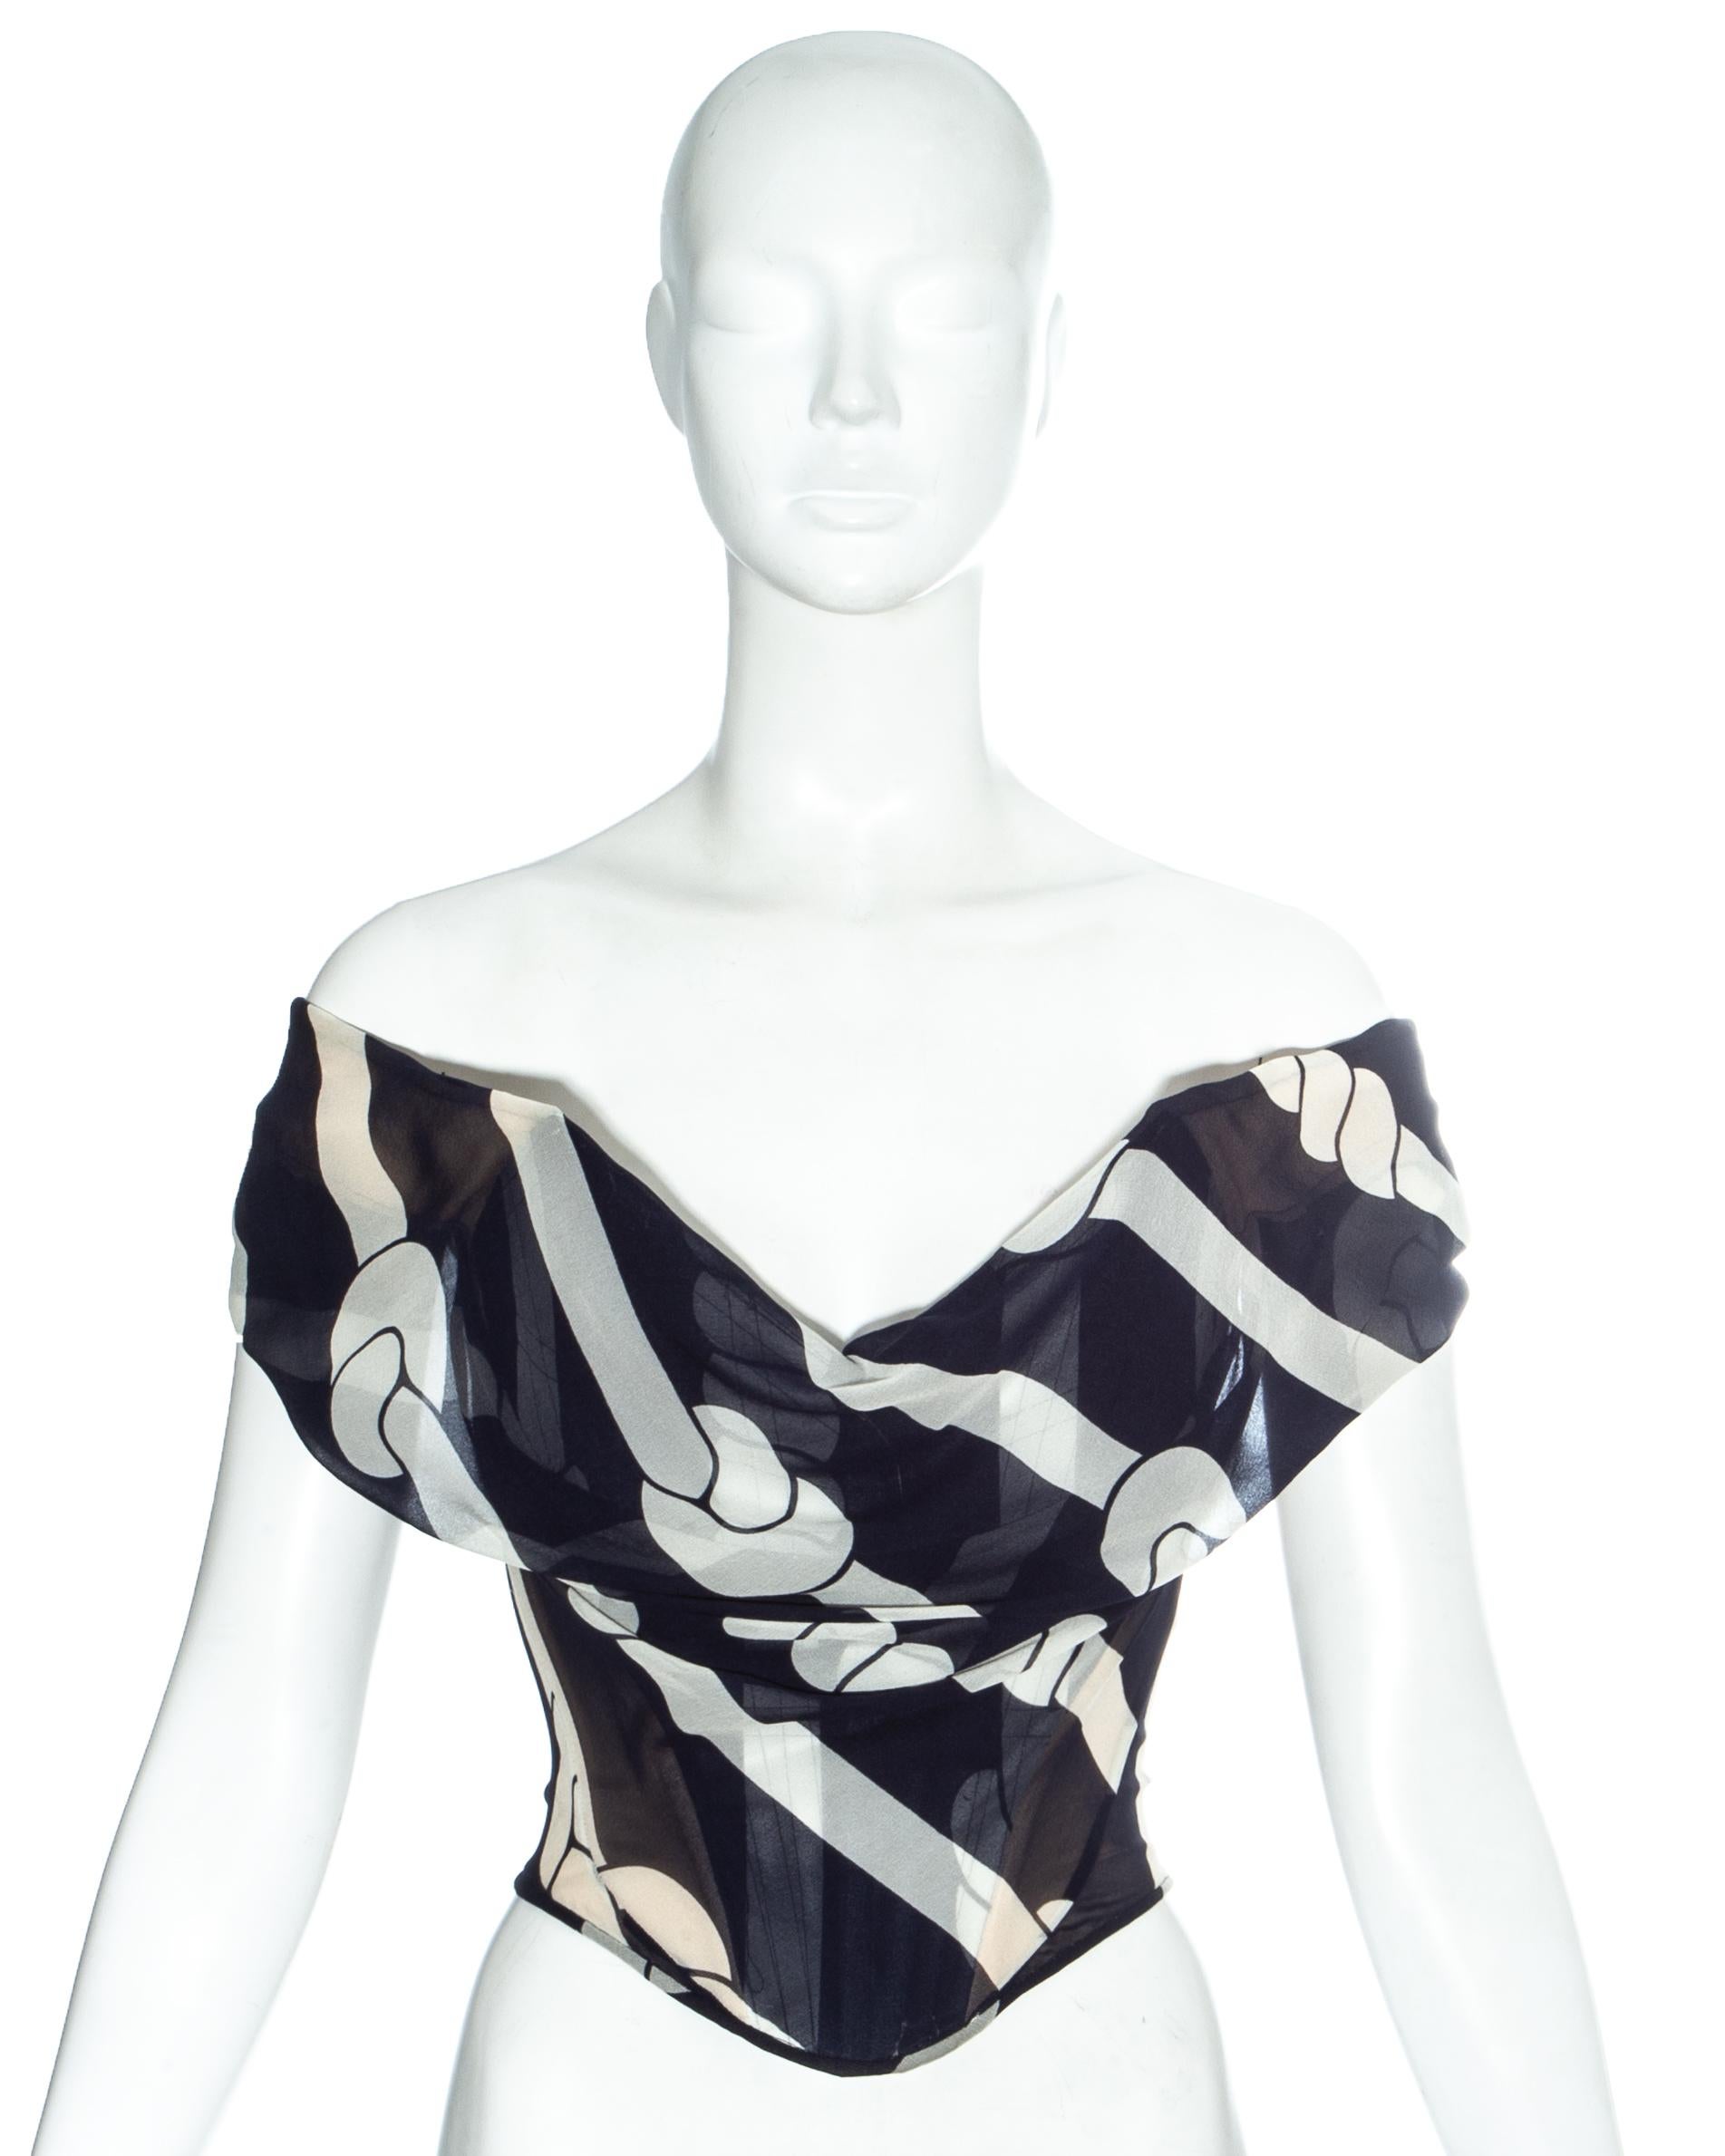 Vivienne Westwood navy and white striped silk chiffon off shoulder corset with internal boning designed to cinch the waist and push the breasts up

Spring-Summer 1998